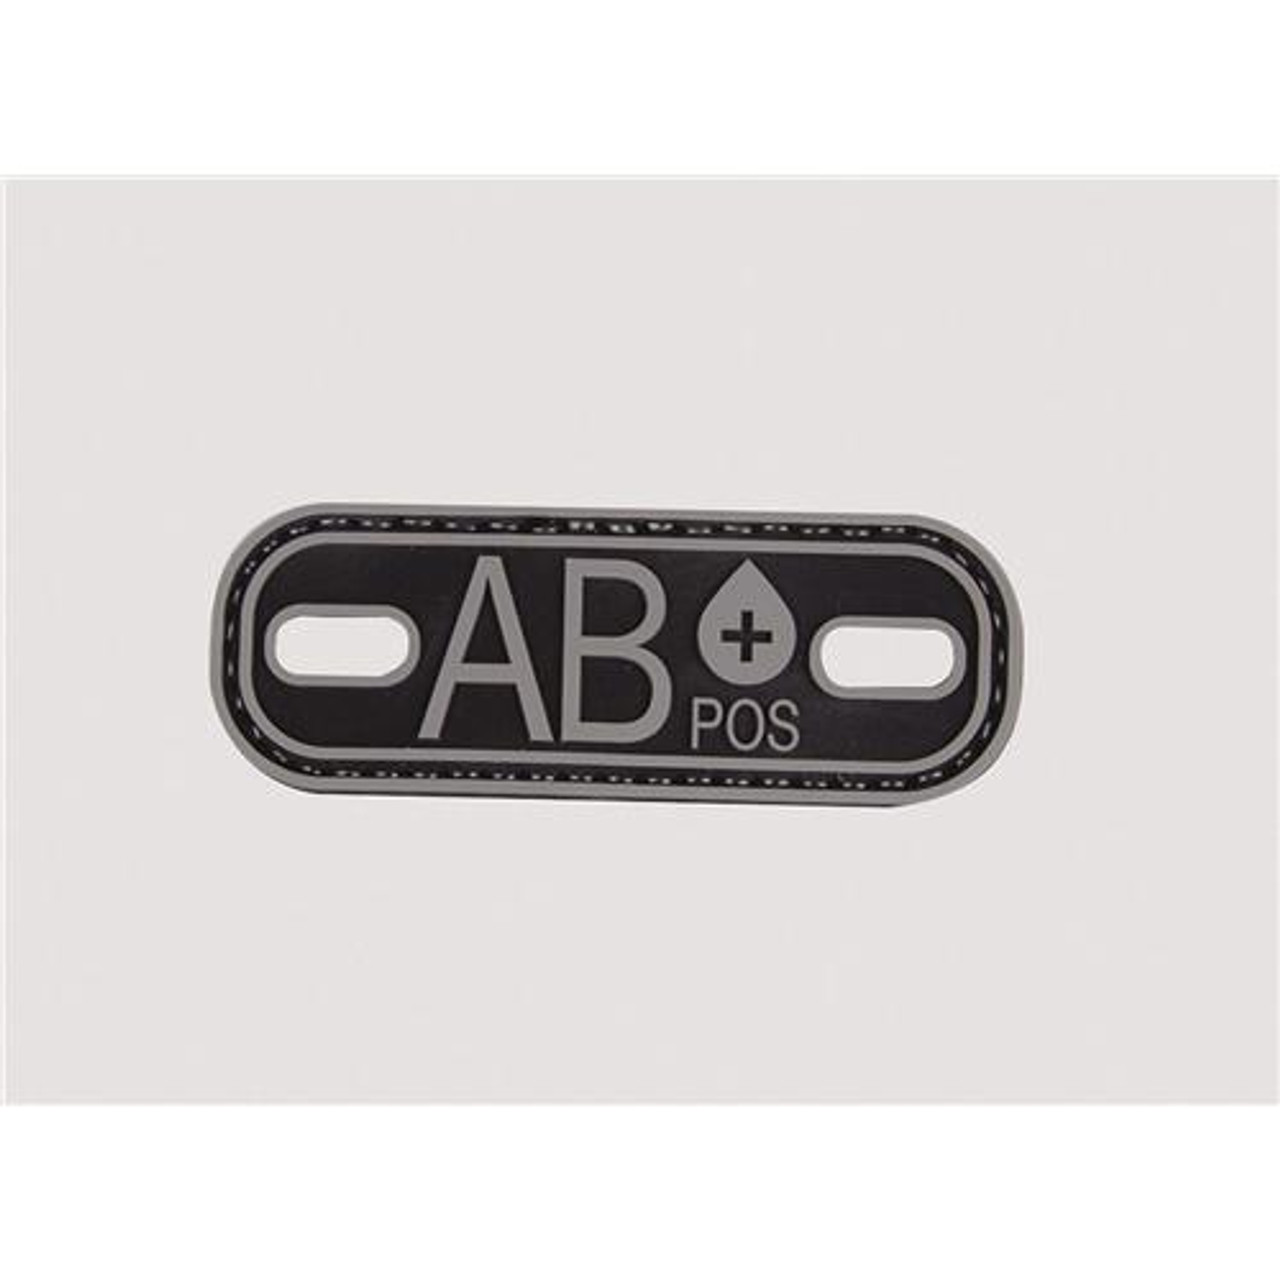 A+ positive Blood type hook and loop Patch black and white PVC